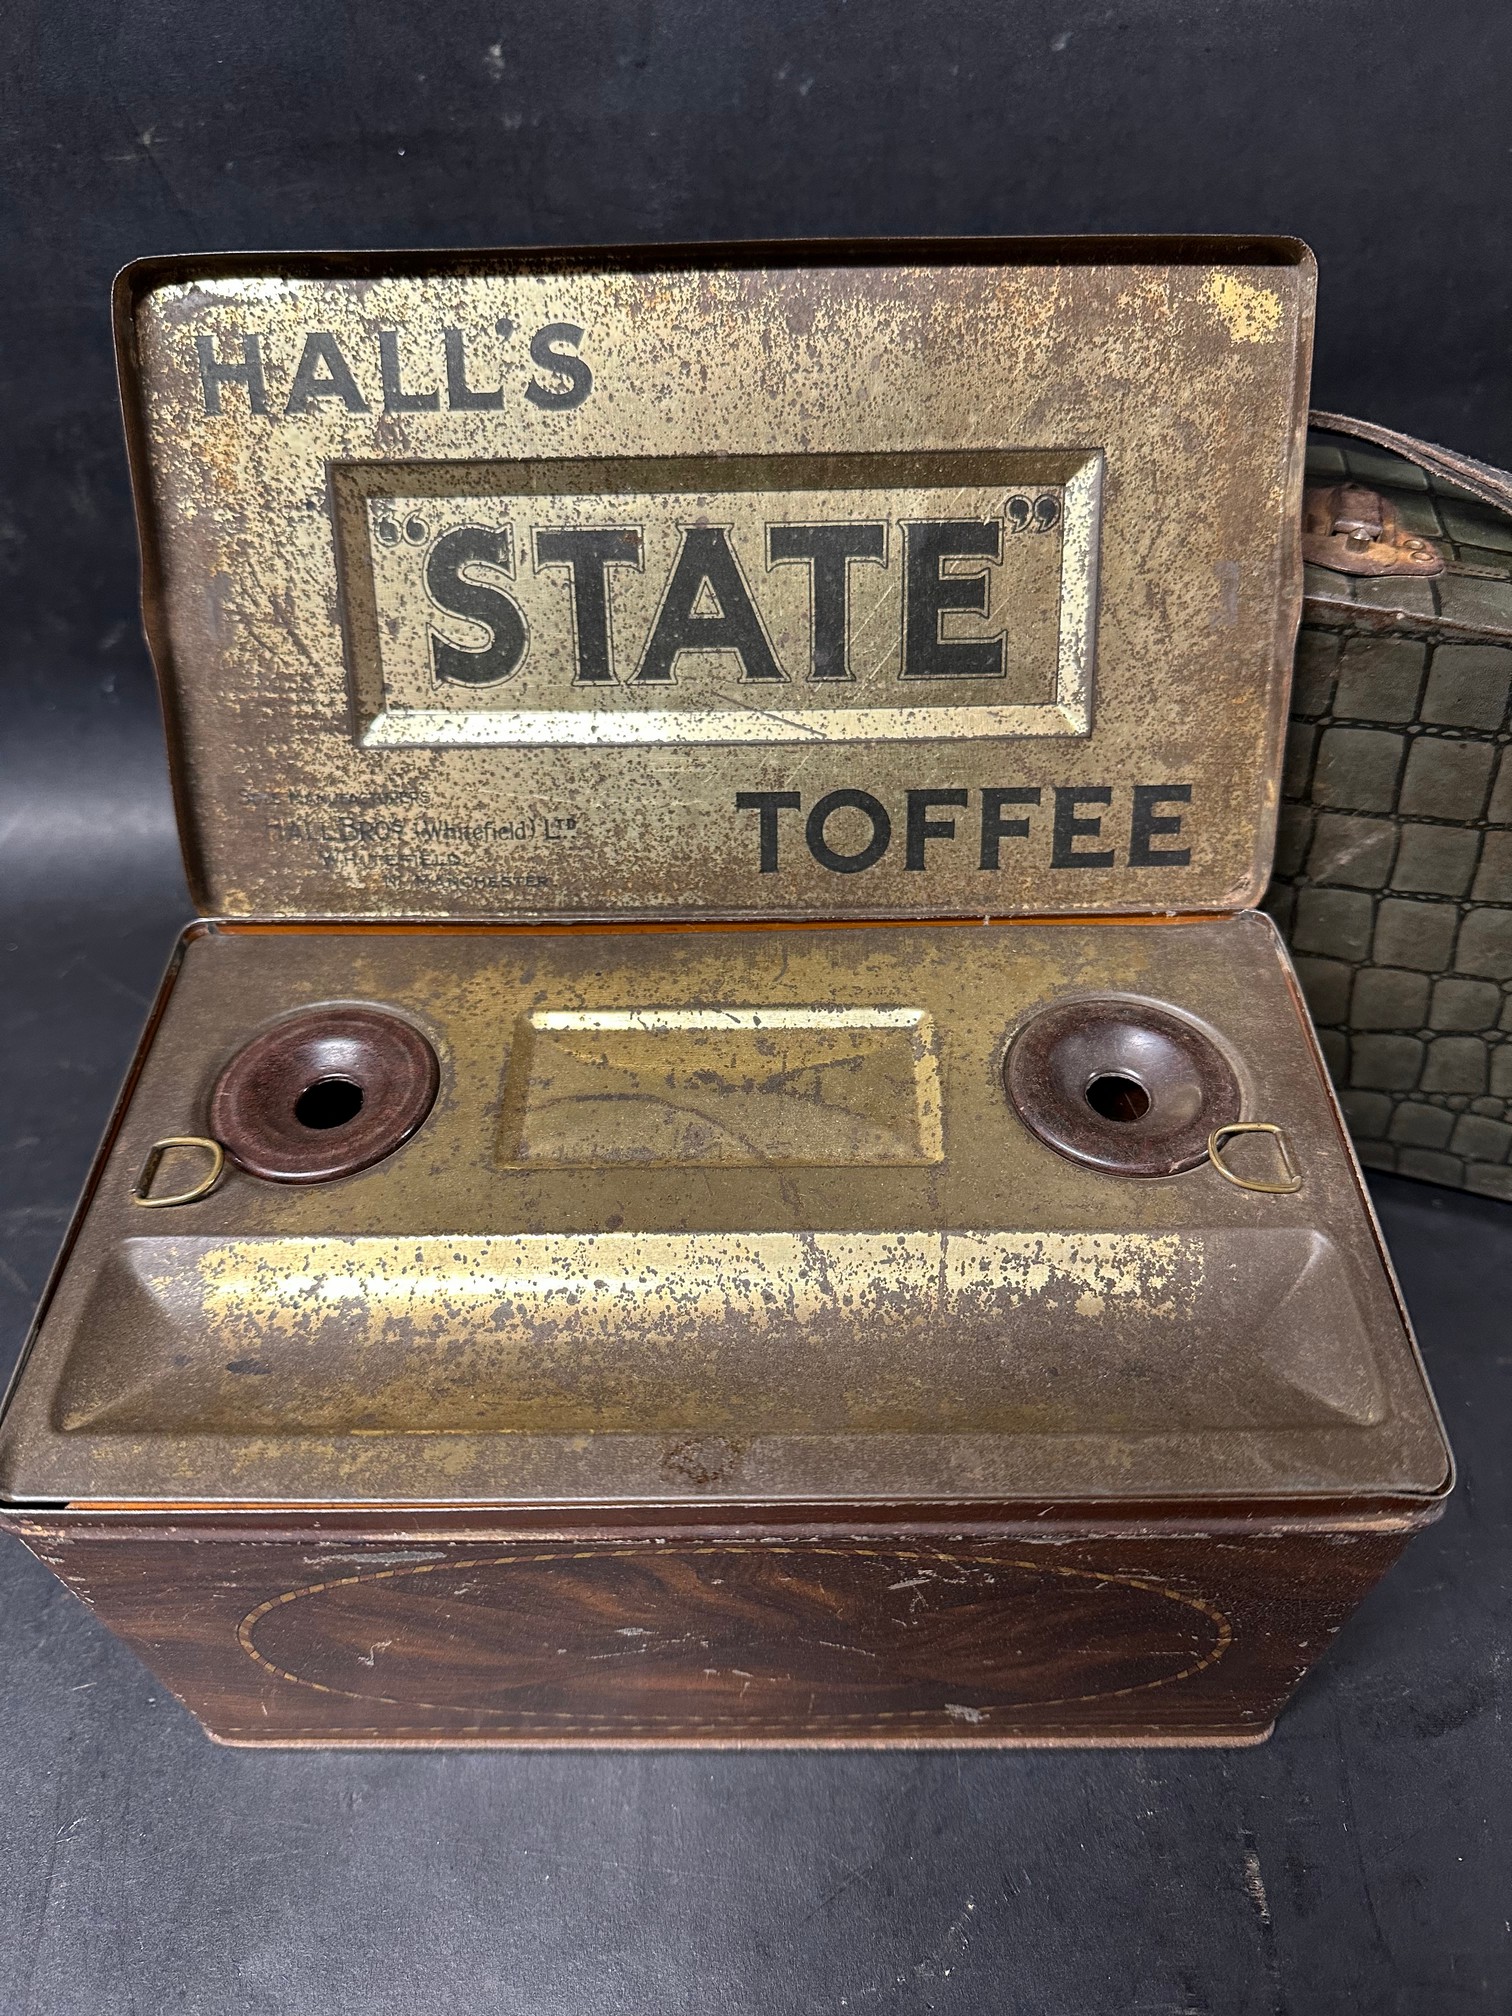 A Turnwright's Toffee De-Light tin in the form of a suitcase and a Hall's State Toffee tin with - Image 2 of 15